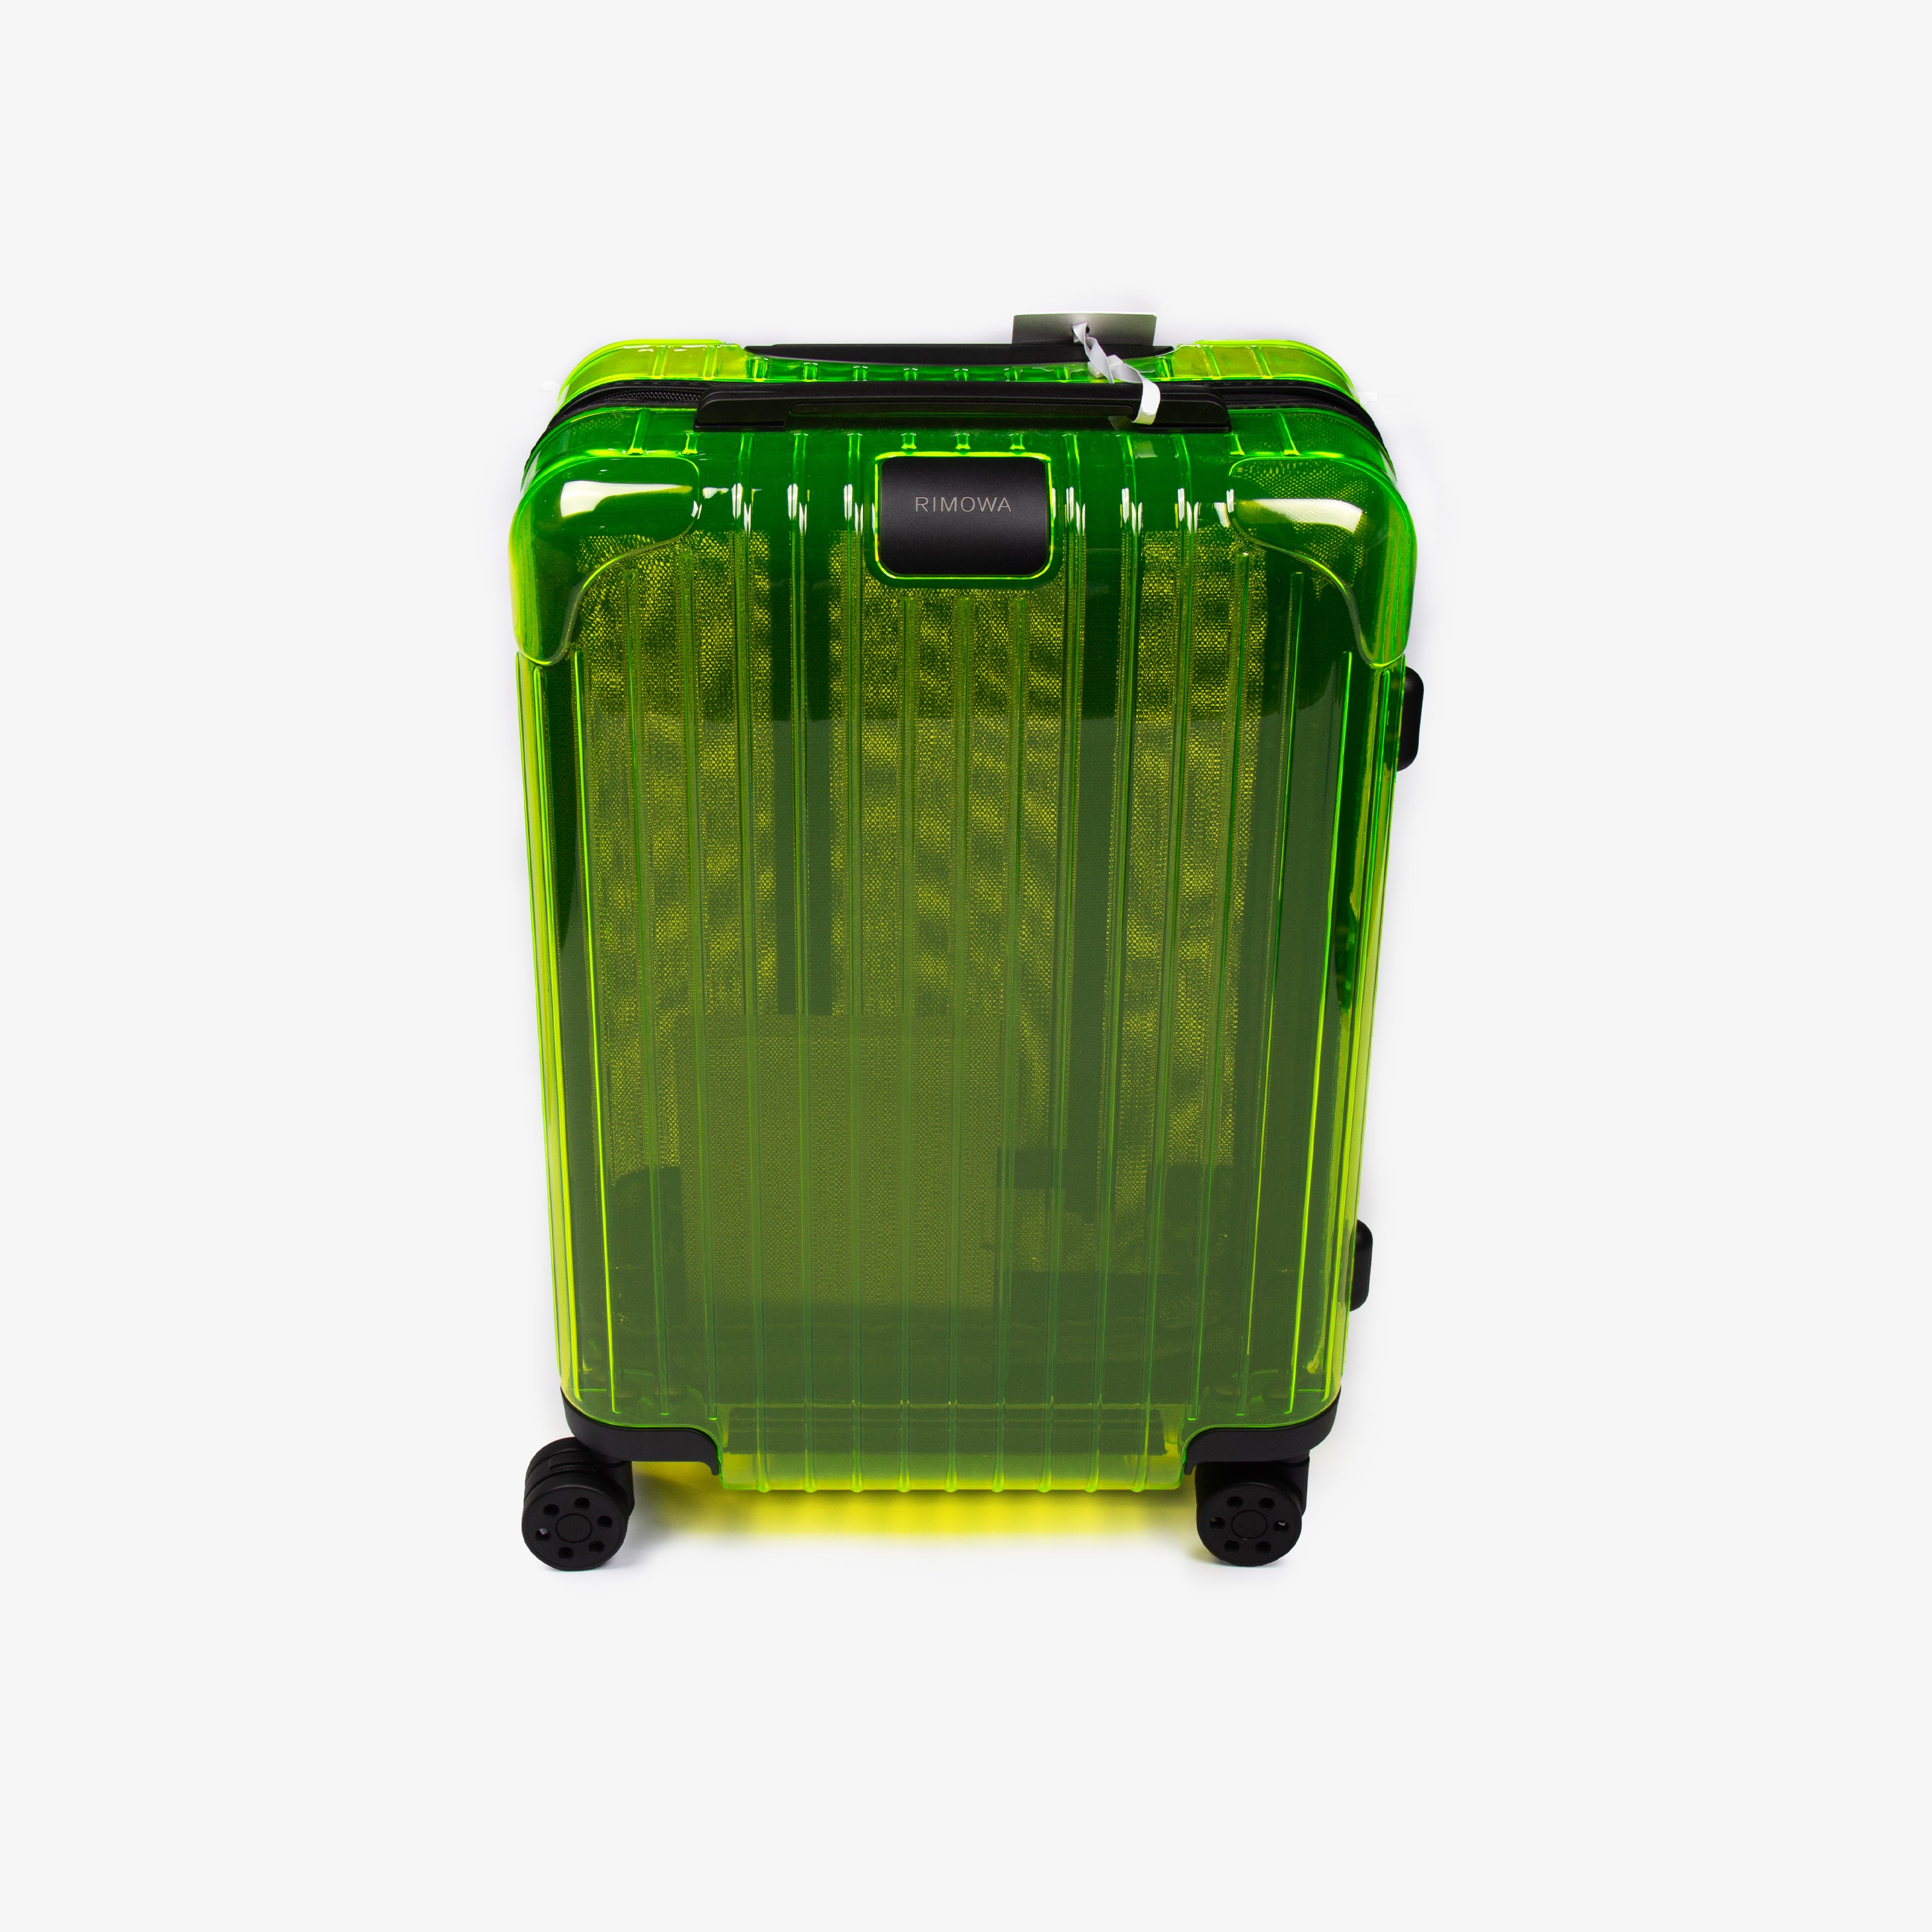 ESSENTIAL CABIN FLUO GREEN CARRY ON